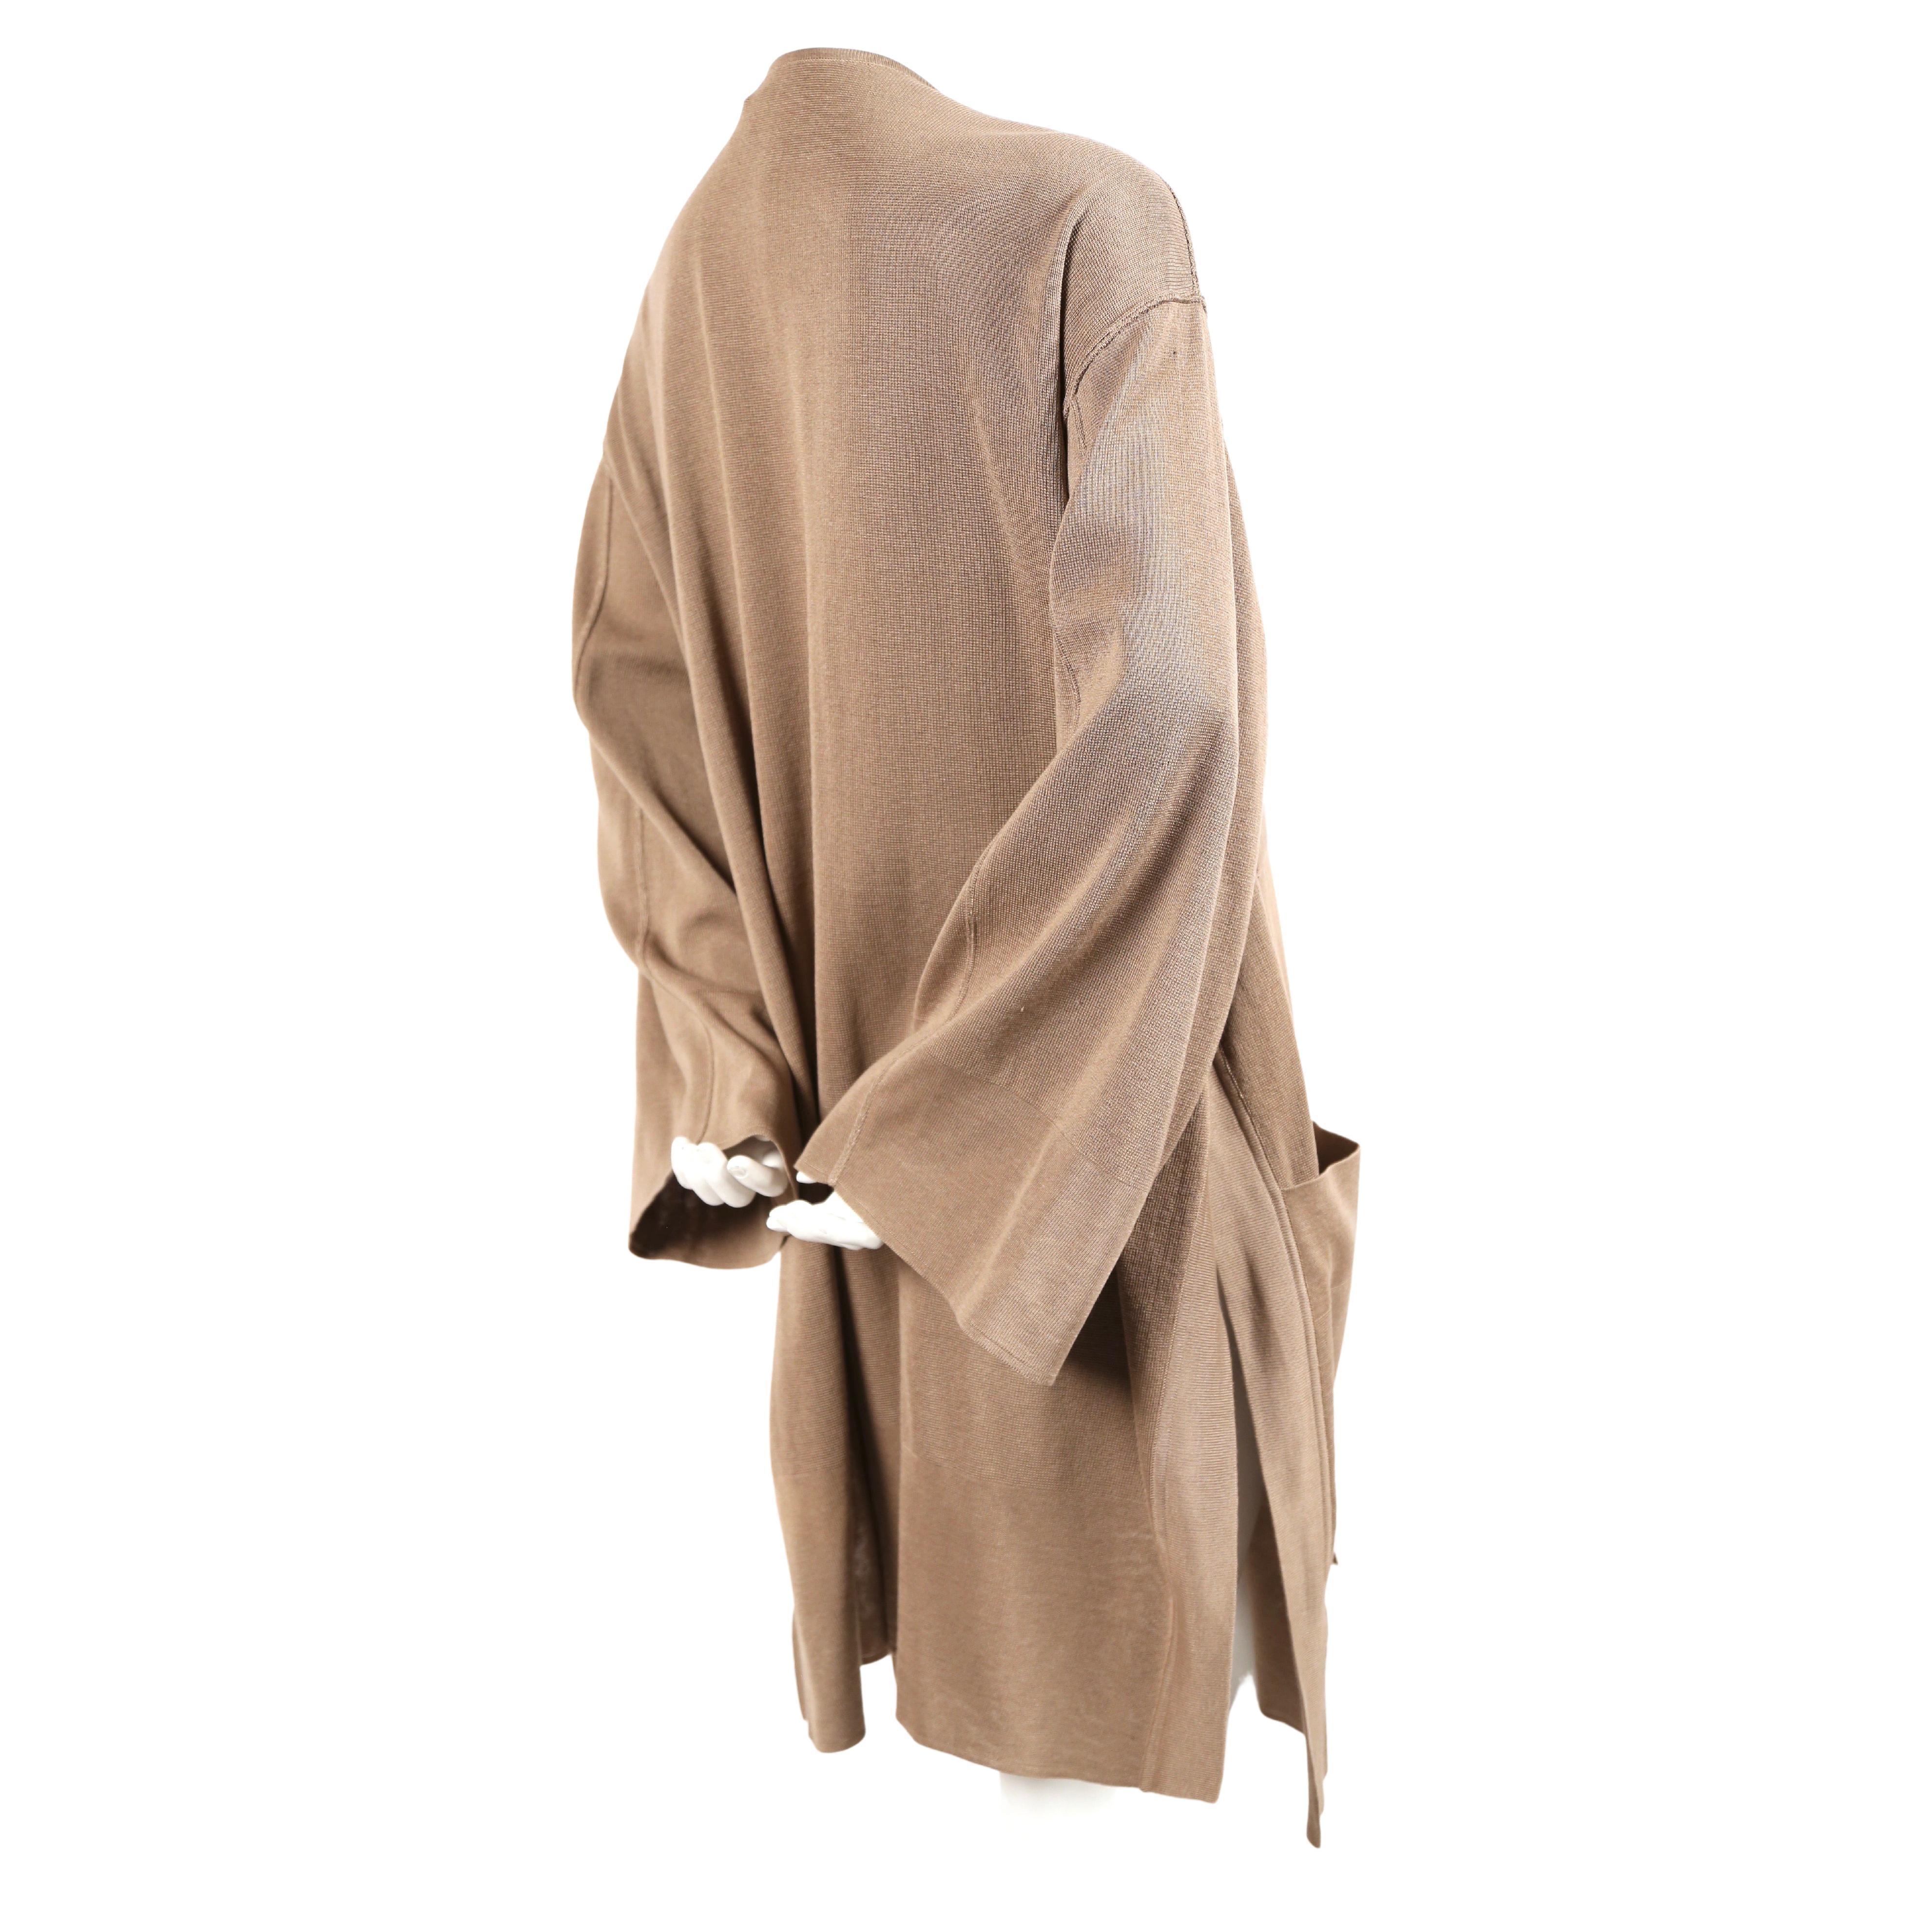 Women's or Men's 1985 AZZEDINE ALAIA oversized tan cardigan sweater coat with pockets For Sale